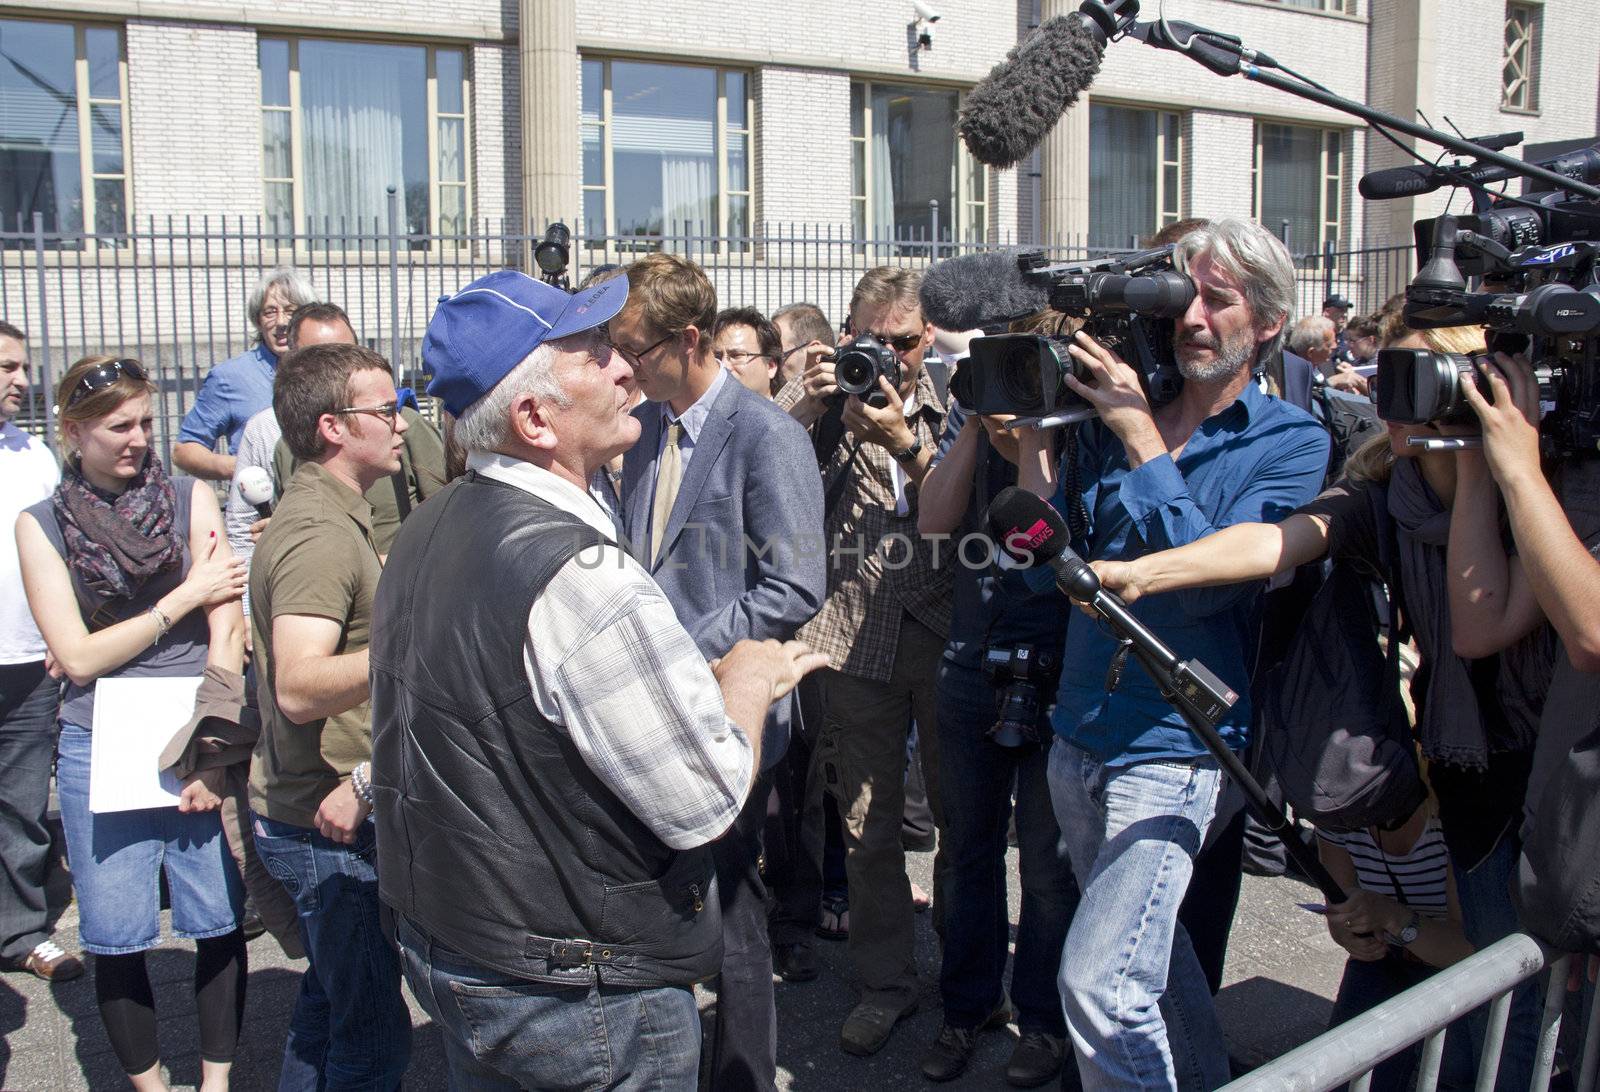 Witness against Mladic talks to the press at the Mladic trial in The Hague